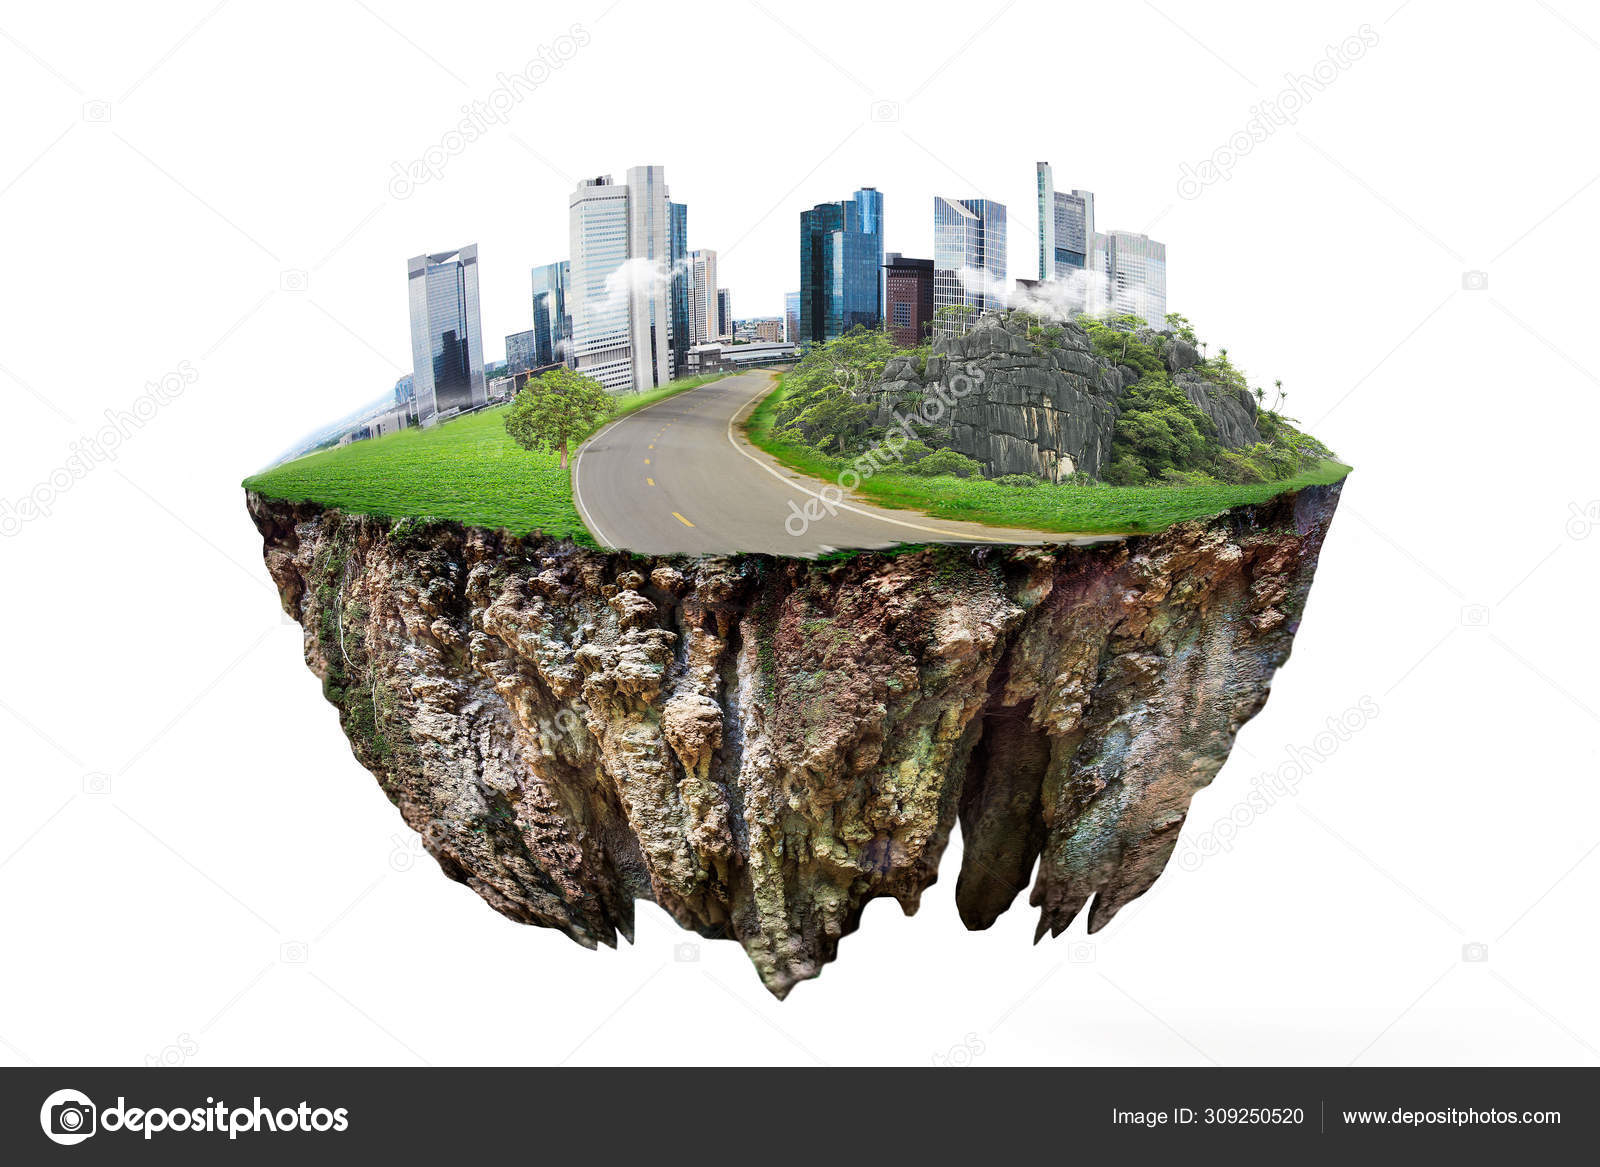 Modern city . fantasy floating island with natural on the rock, Stock Photo  by ©ganchaonan1@gmail.com 309250520